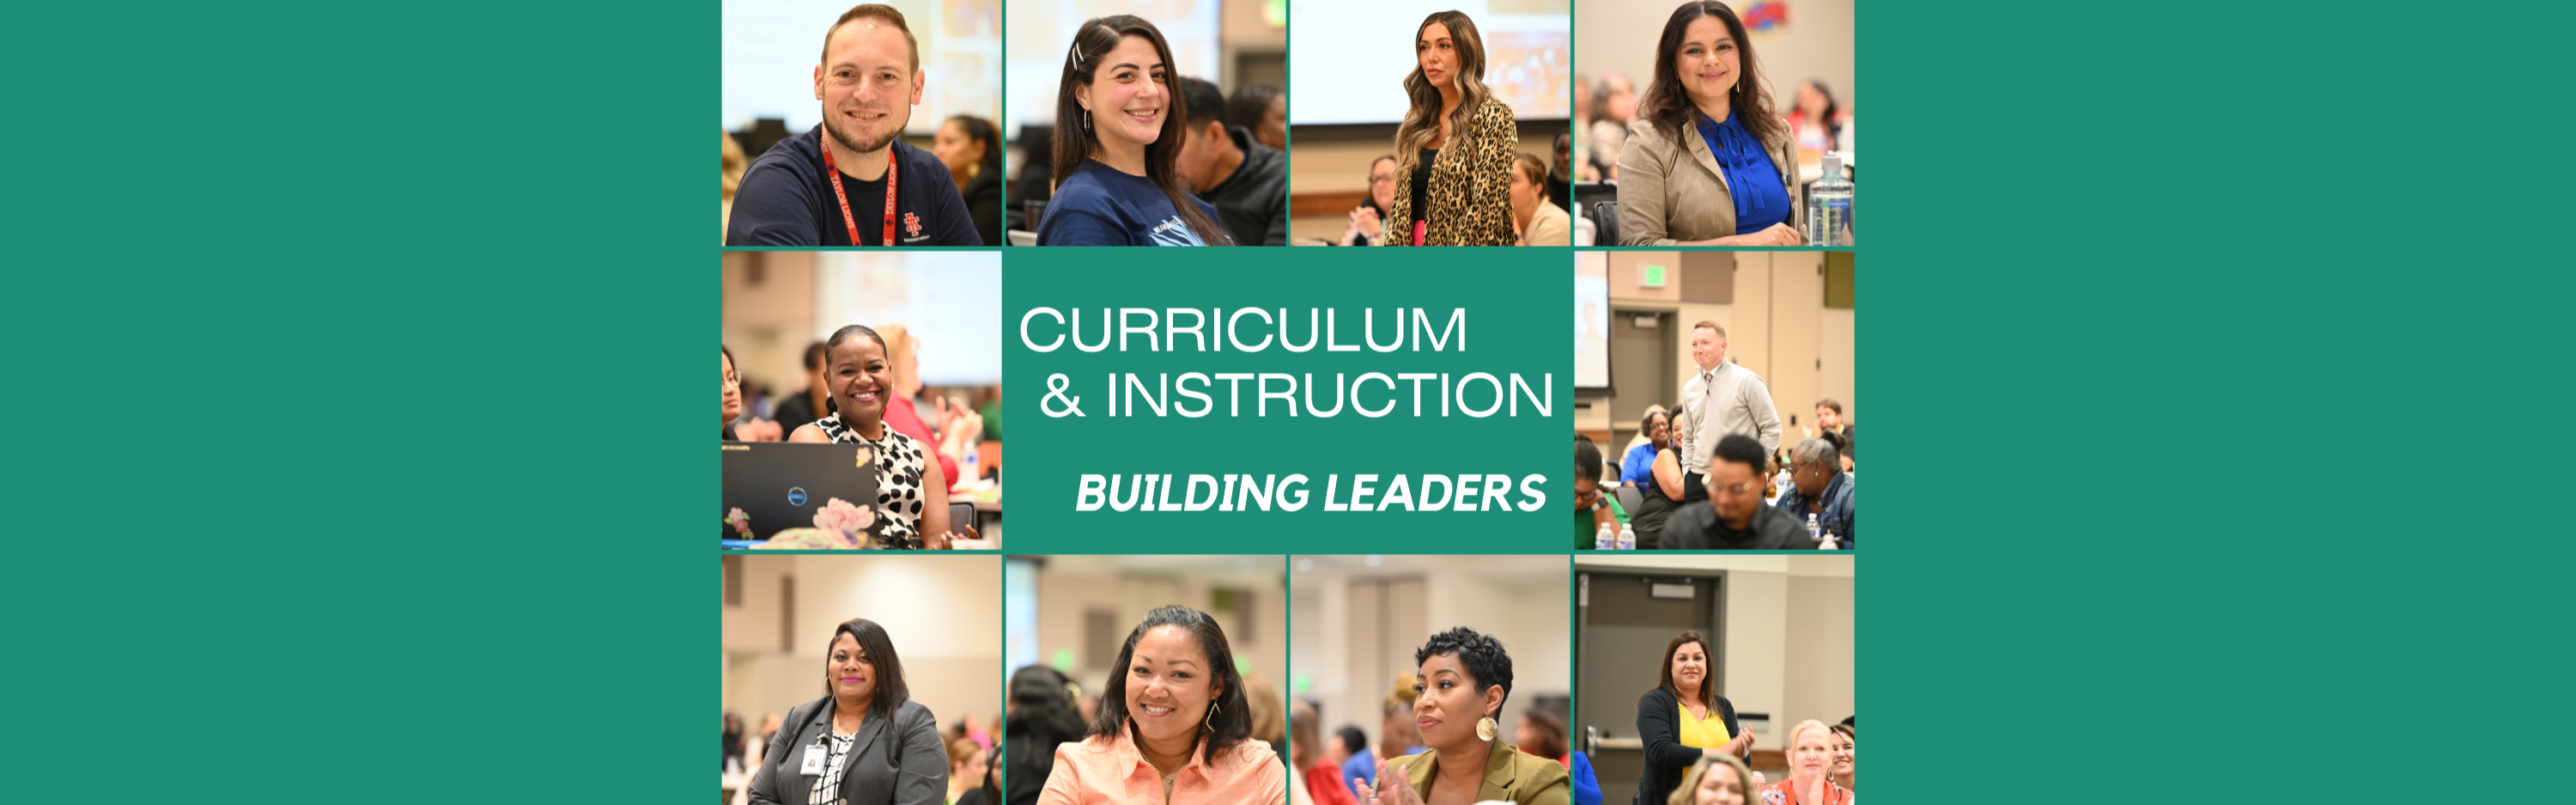 Curriculum Instruction Building Leaders Collage